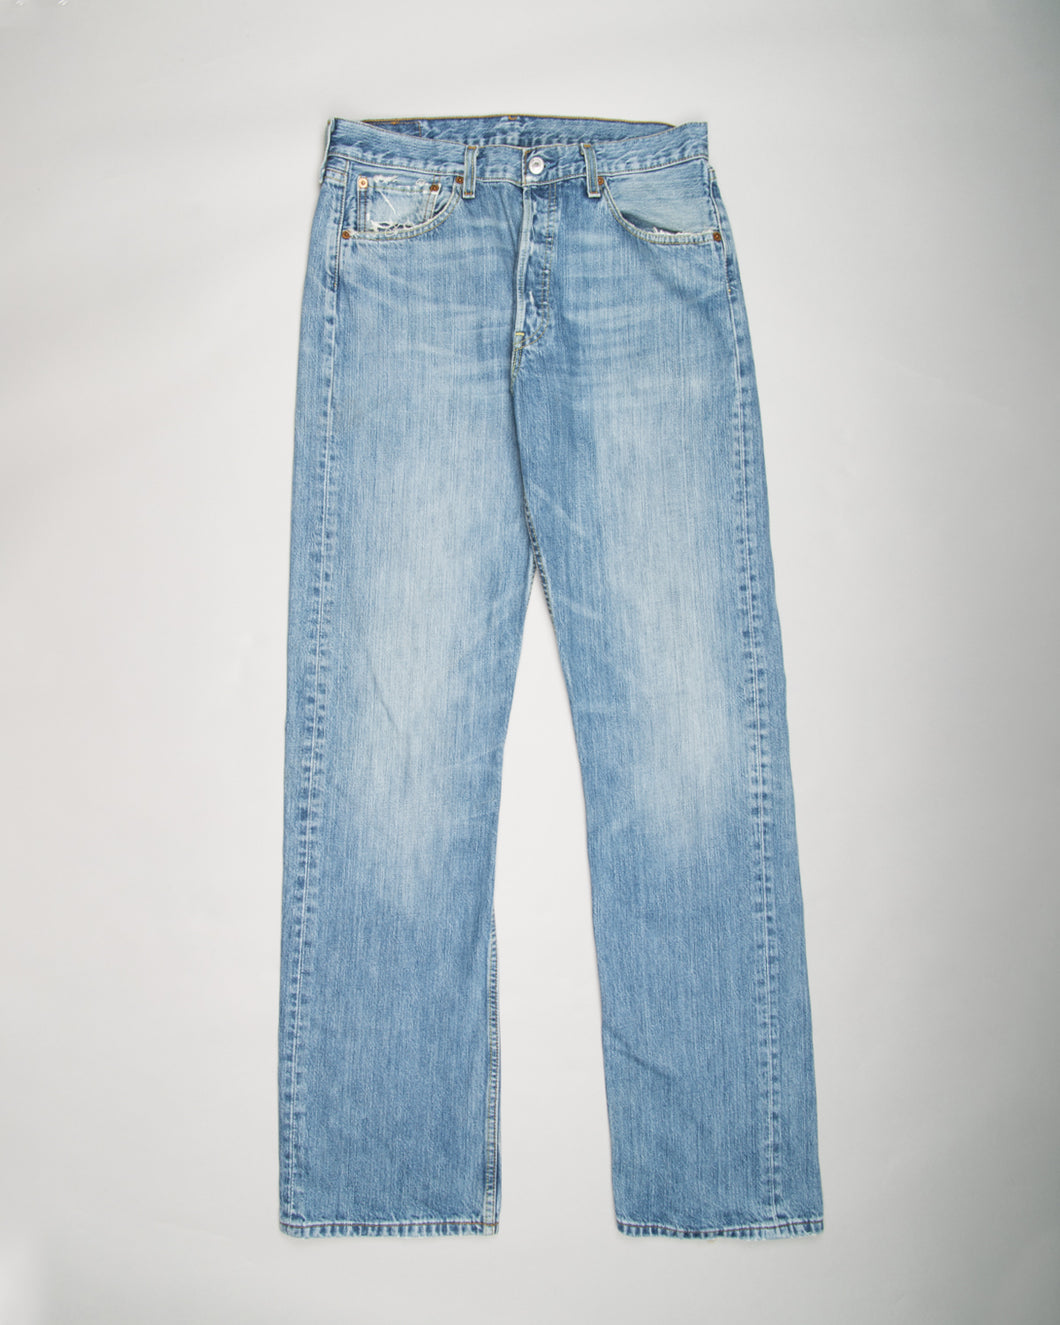 Distressed Blue 501 Straight Leg Fit Jeans